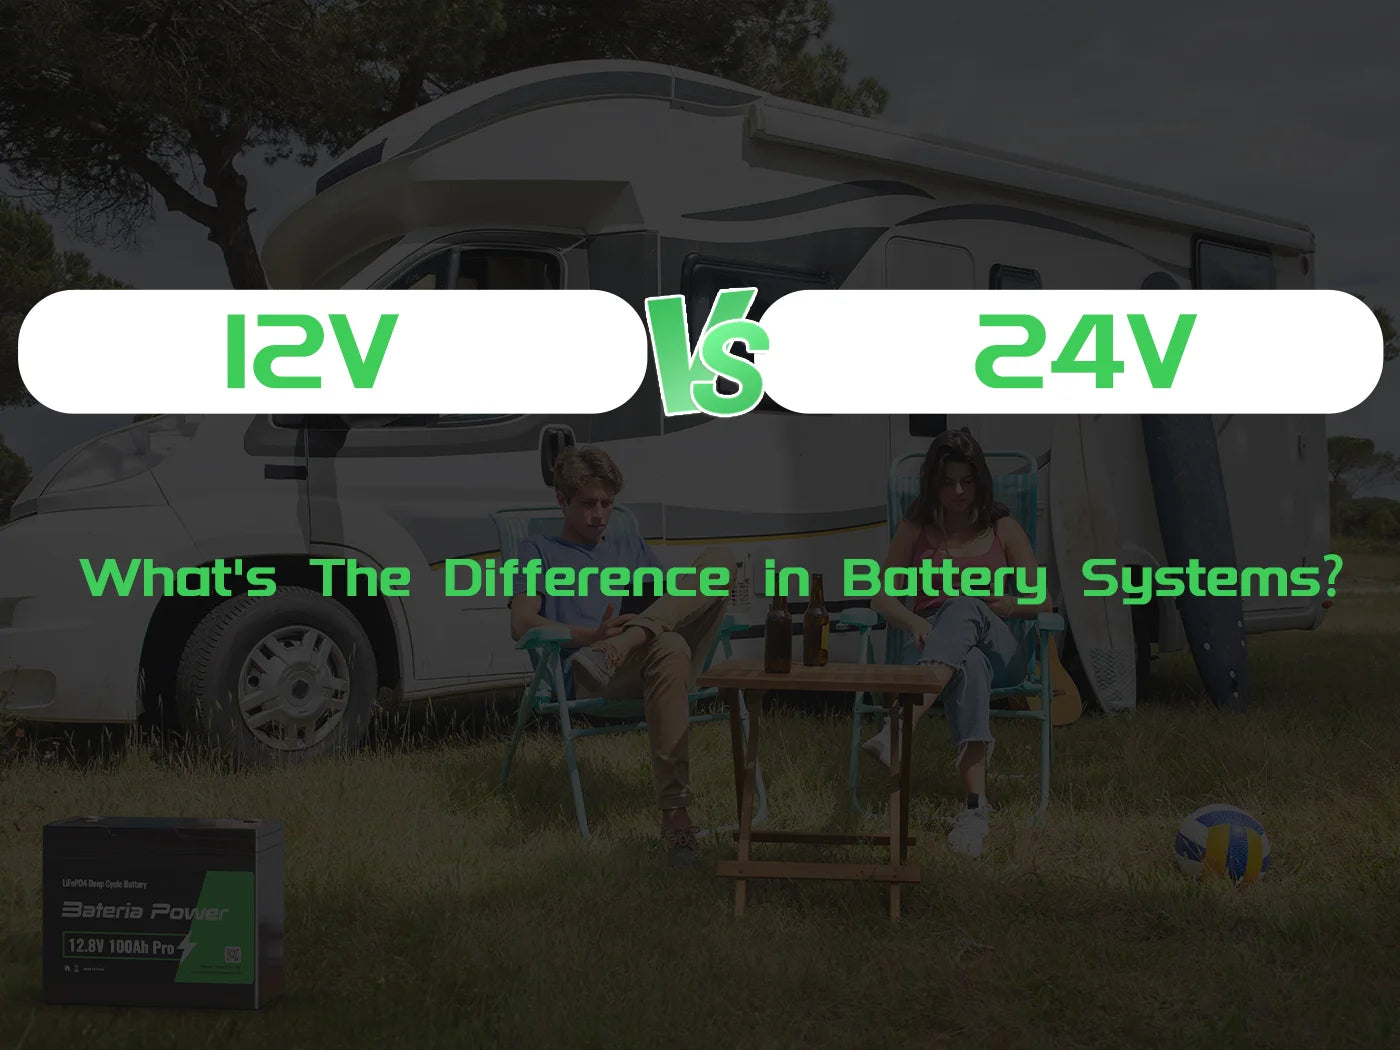 12V vs 24V: What's The Difference in Battery Systems?